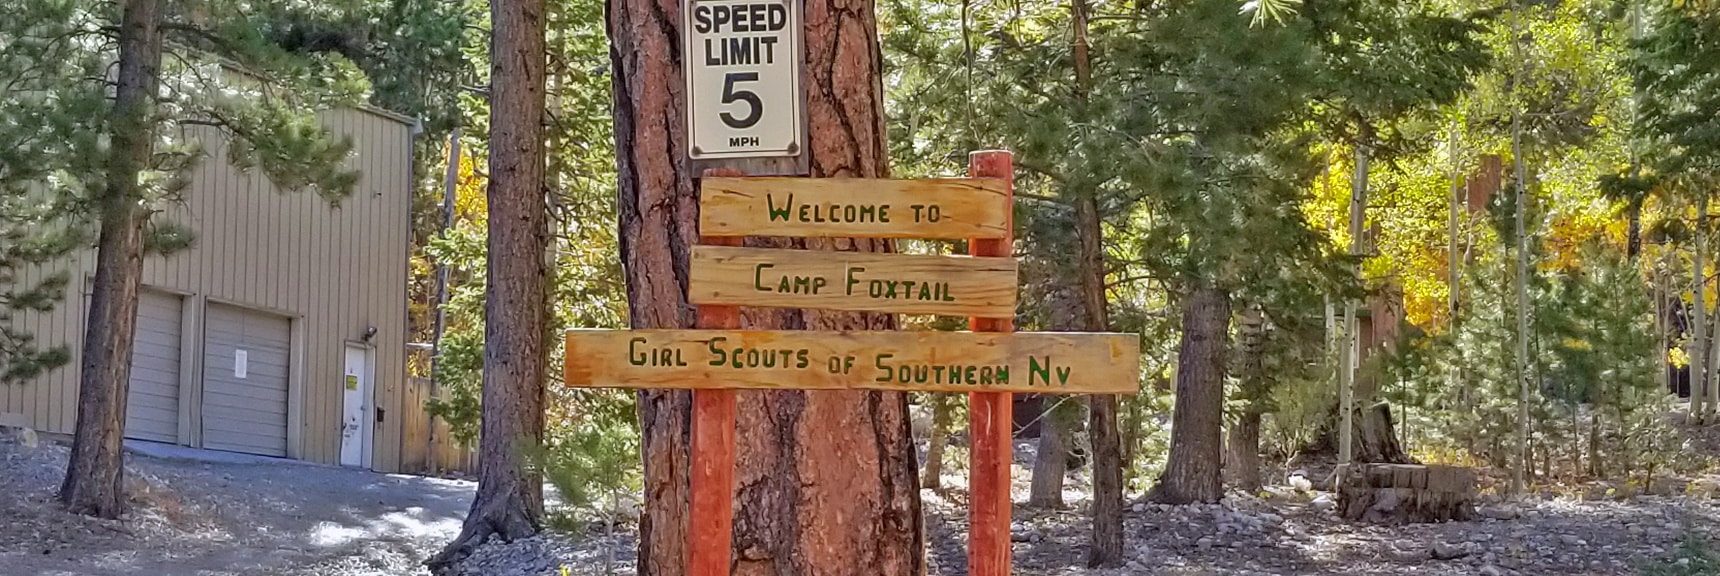 Main Entrance to Camp Foxtail Girl Scout Camp | Foxtail Canyon | Foxtail Girl Scouts Camp | Mt Charleston Wilderness | Spring Mountains, Nevada